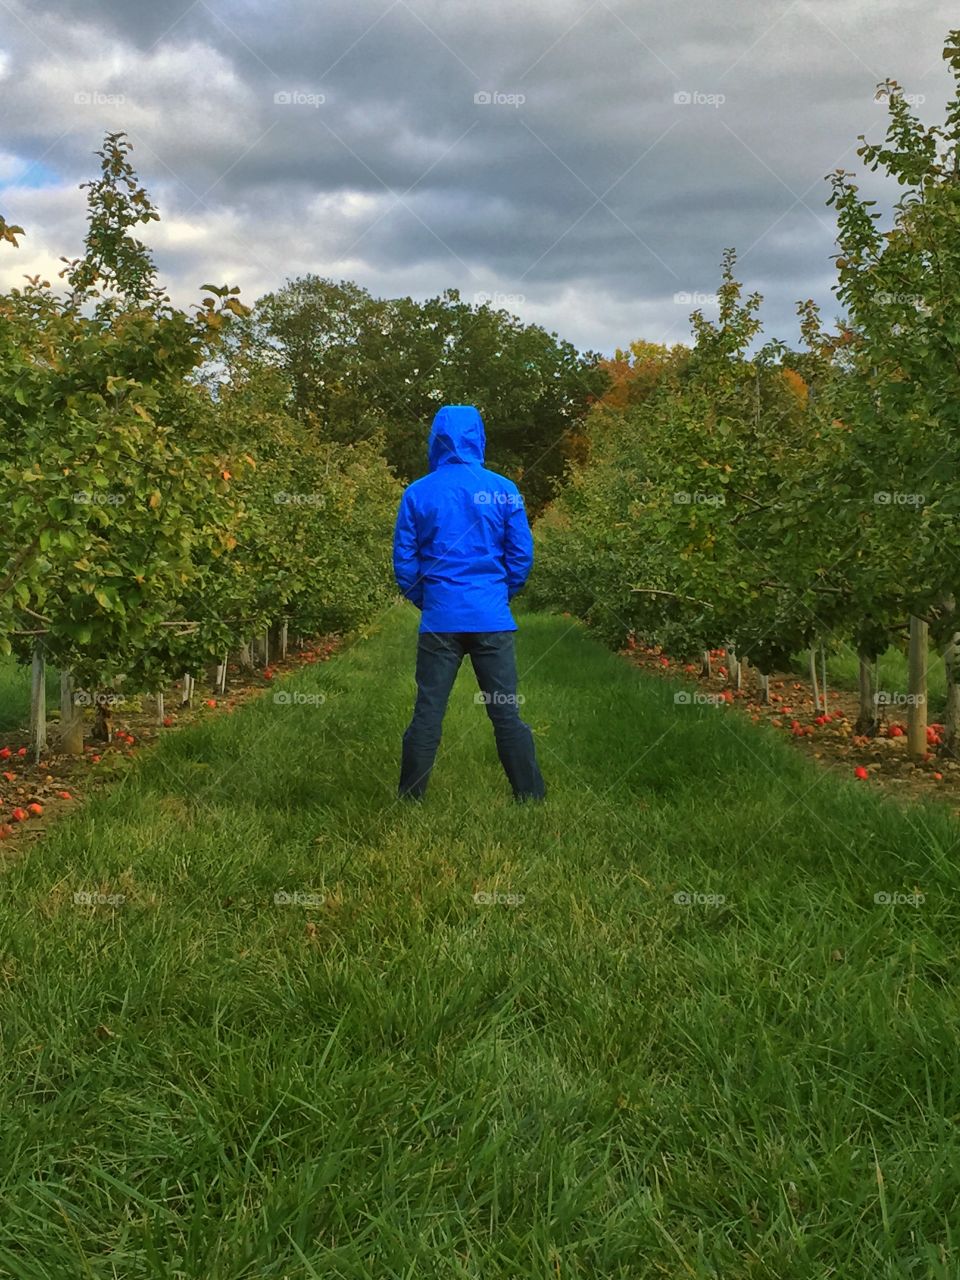 Standing in row. Standing in a orchard. 